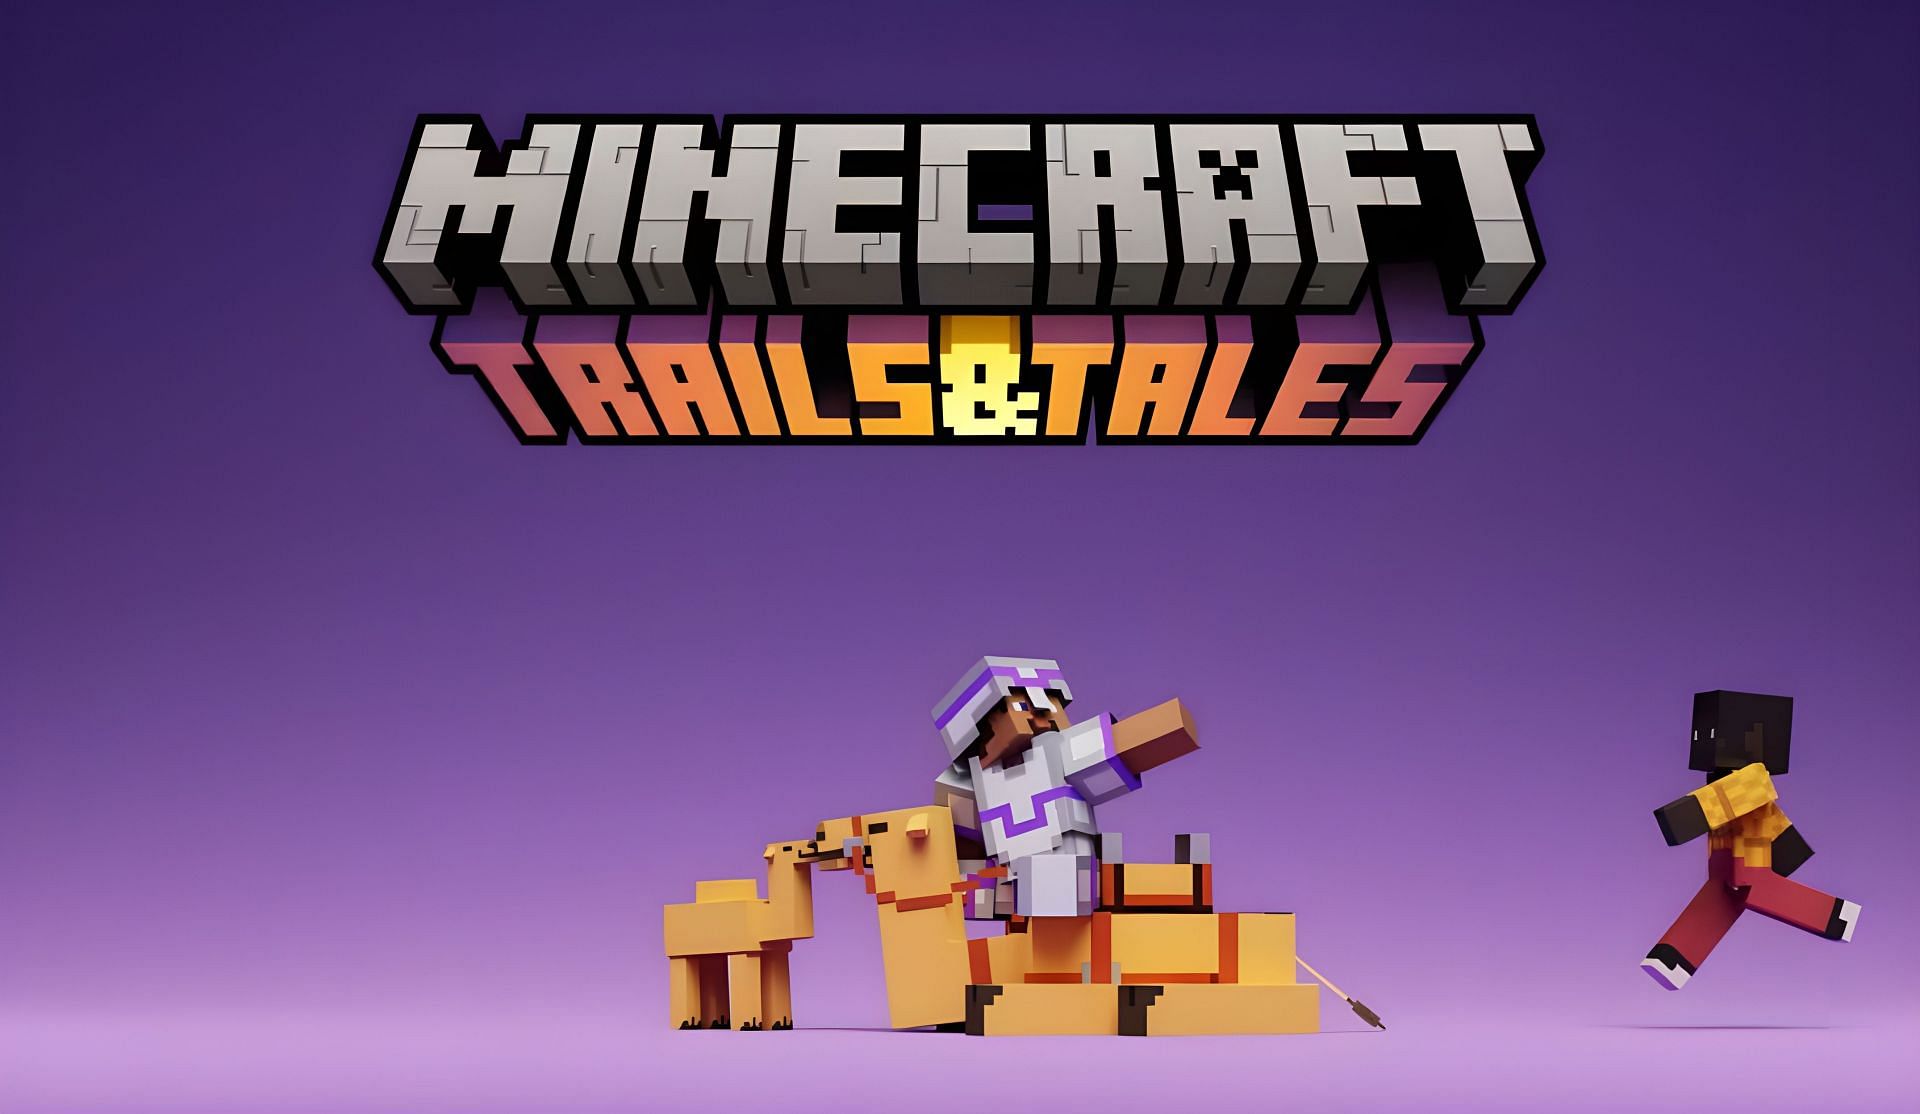 Minecraft: Bedrock Edition for Chromebook is expected to be launched alongside the Trails &amp; Tales update (Image via Mojang)